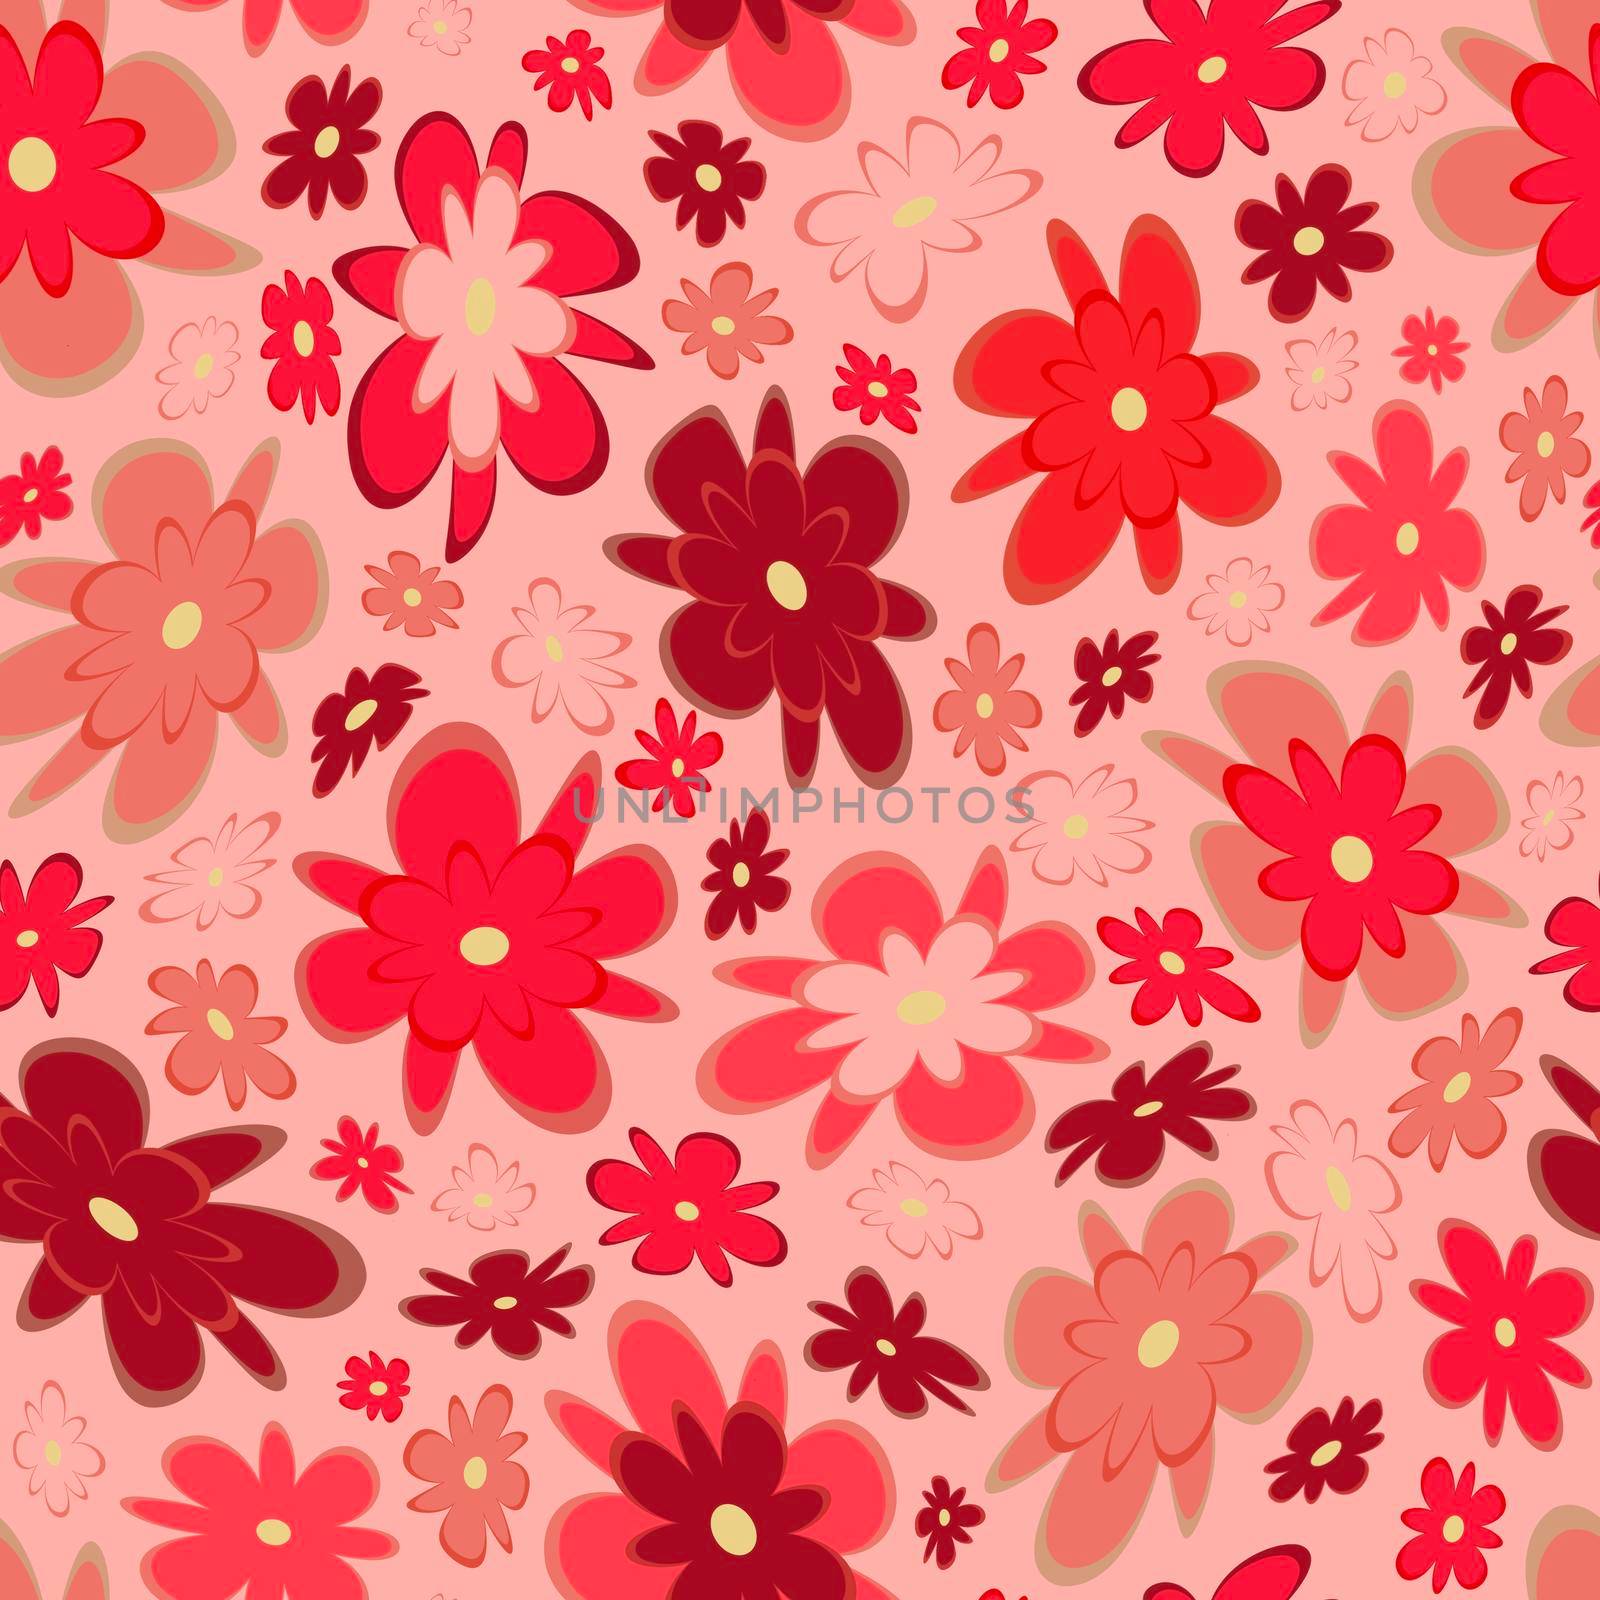 Trendy fabric pattern with miniature flowers.Summer print.Fashion design.Motifs scattered random.Elegant template for fashion prints.Good for fashion,textile,fabric,gift wrapping paper.Coral on pink by Angelsmoon